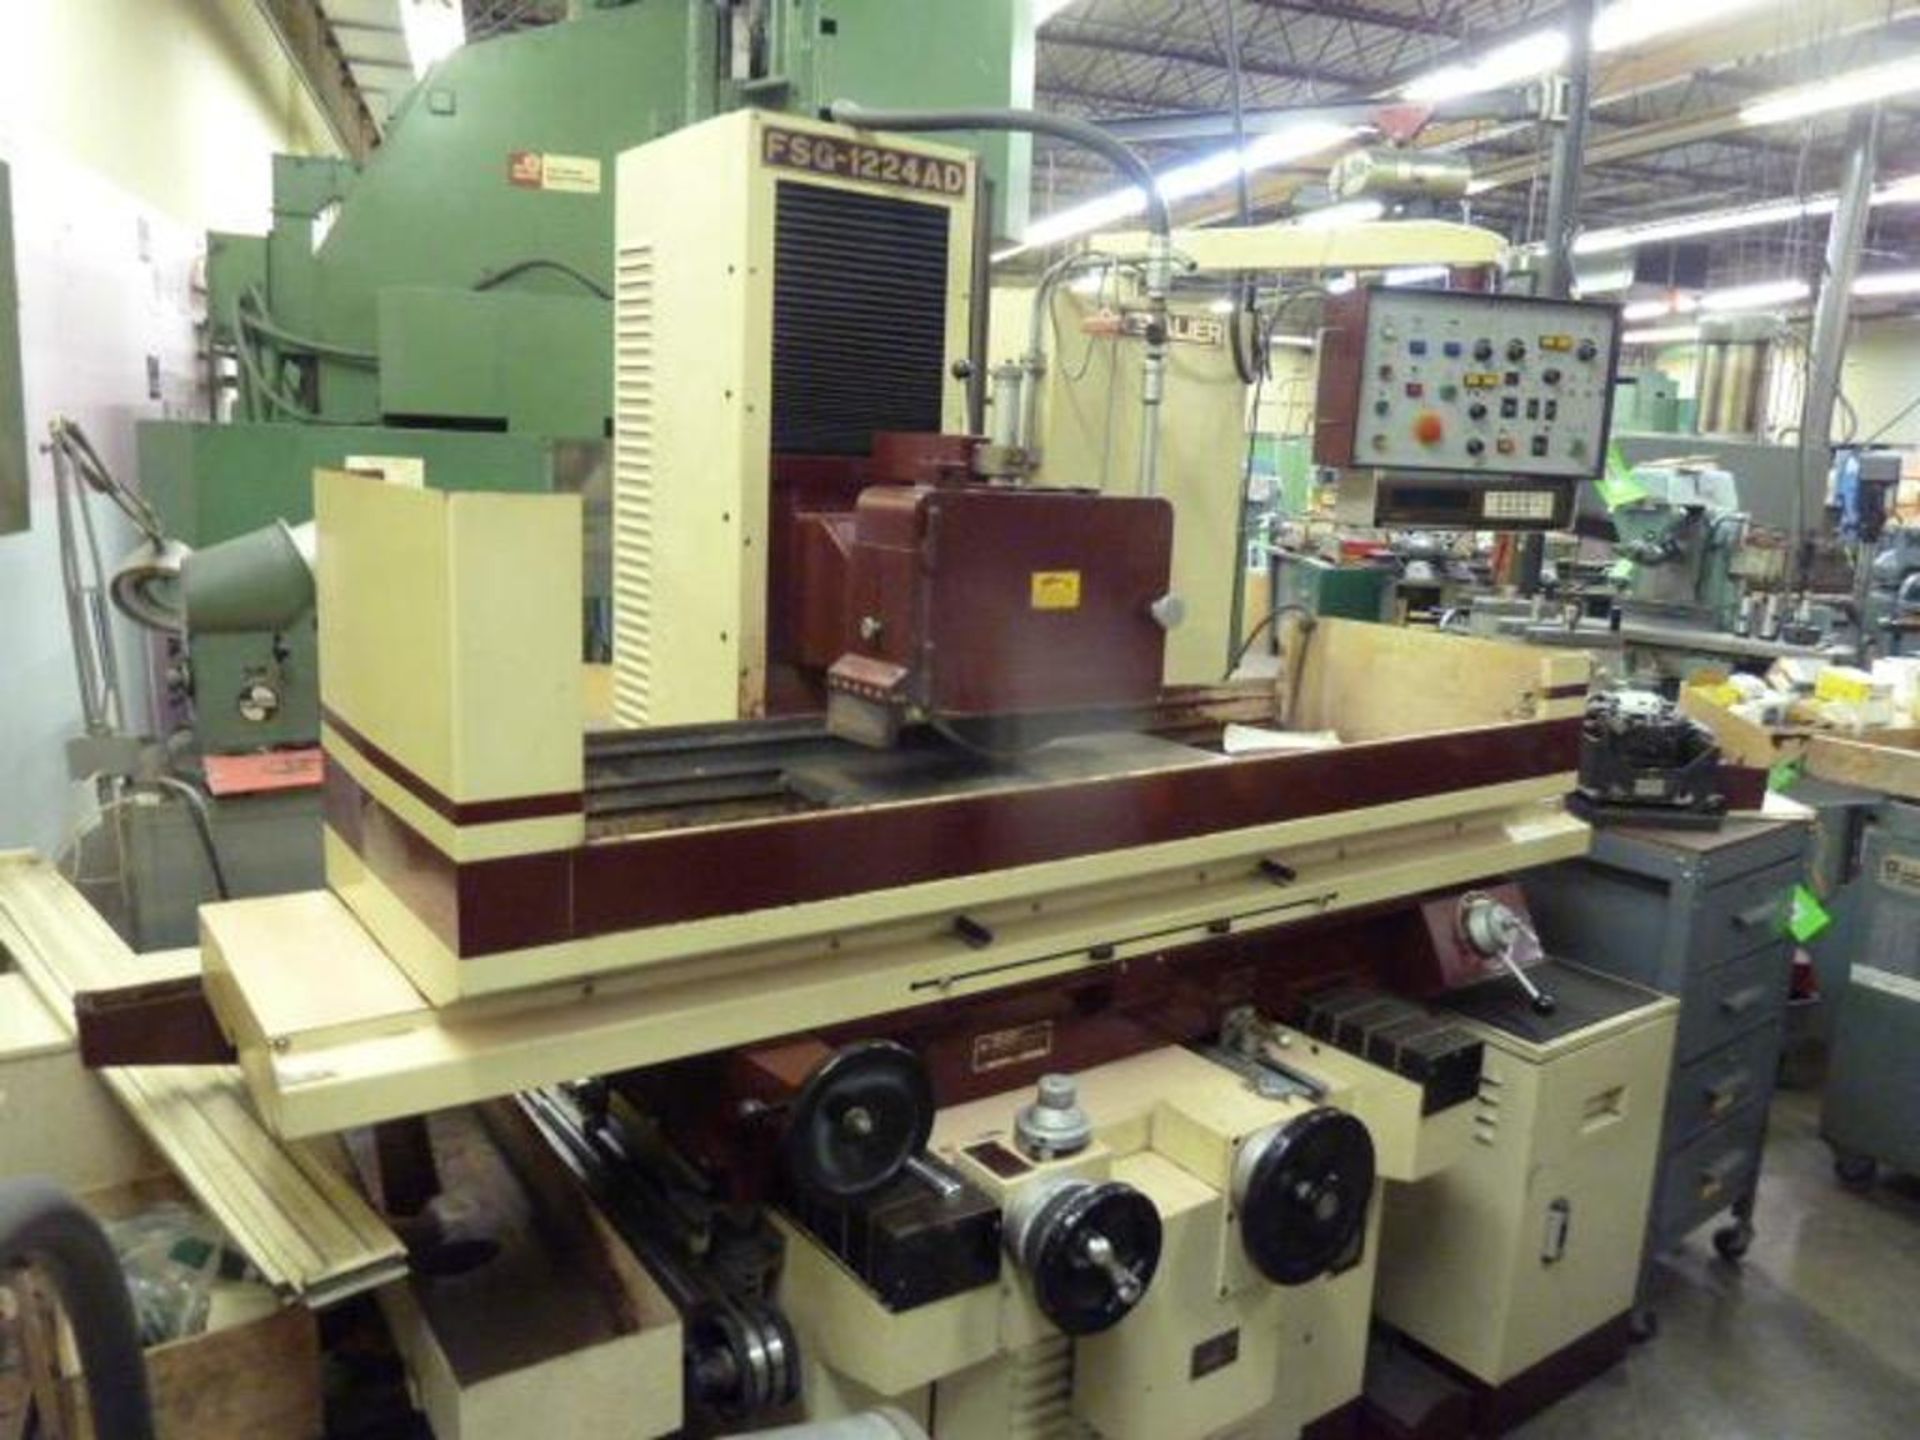 Chevalier Model 1224AD Hydraulic Surface Grinder, 12" x 24" Fine Line Electro-Magnetic Chu - Image 11 of 12